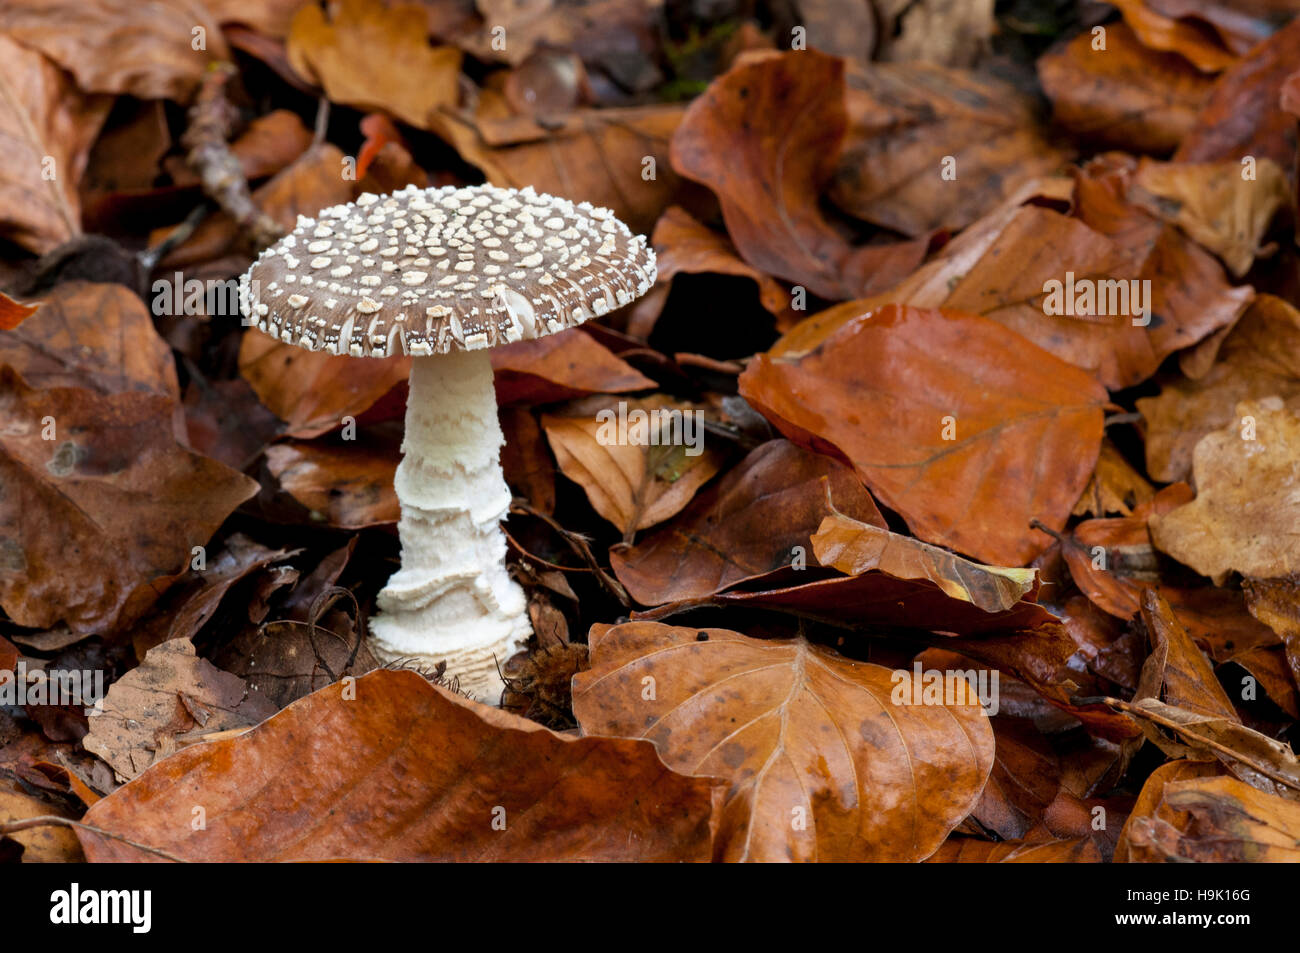 The fruiting body of a grey spotted amanita (Amanita excelsa var. spissa) growing amongst fallen beech leaves on the forest floor. The New Forest, Ham Stock Photo